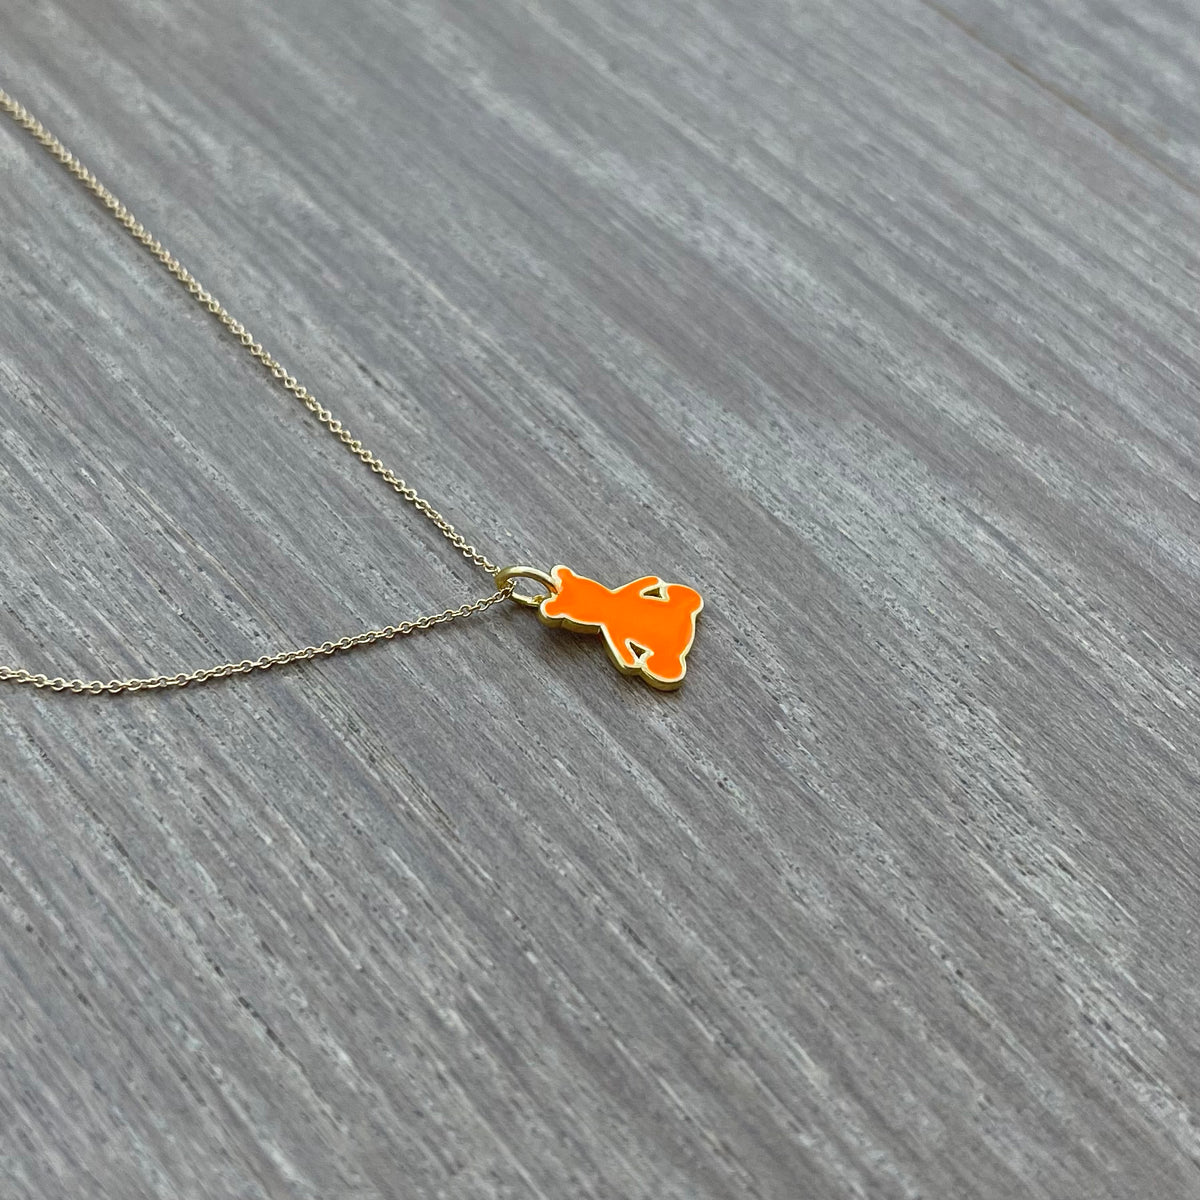 Neon Orange Gold Teddy Bear Pendant with Necklace | K by Krystyna